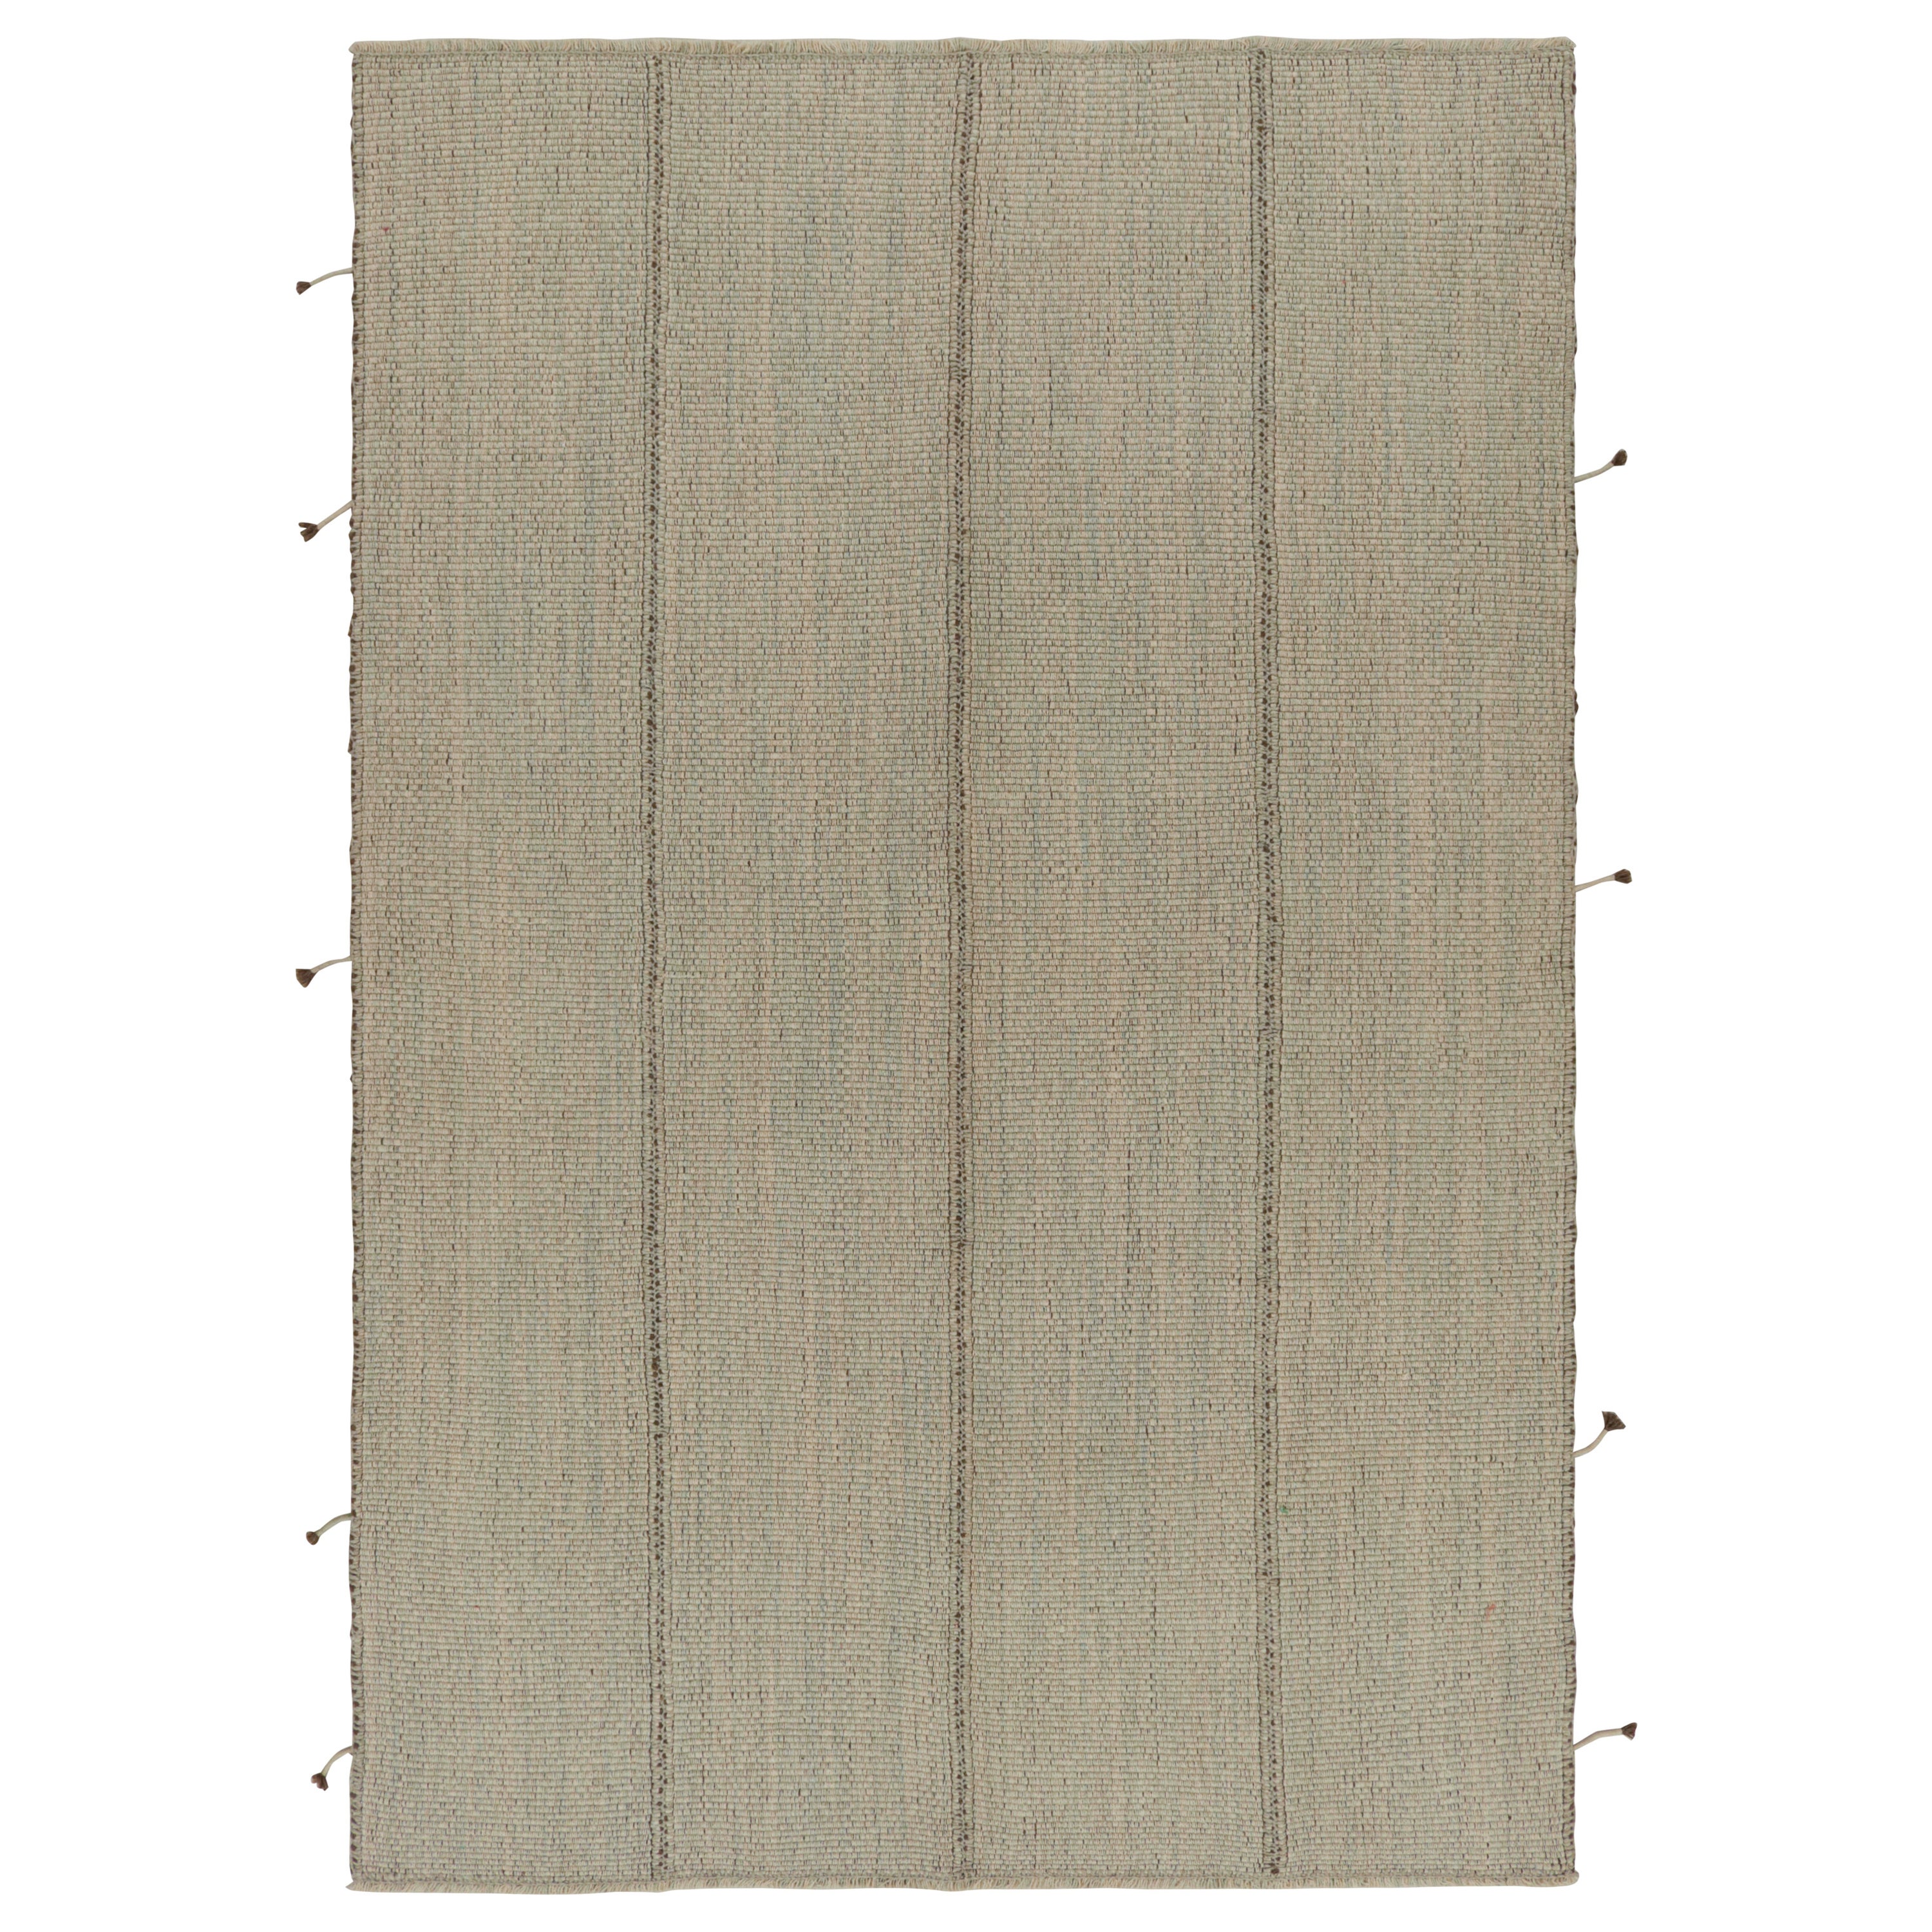 Rug & Kilim’s Modern Kilim in Beige-Brown with Stripes & Green-Grey Accents For Sale